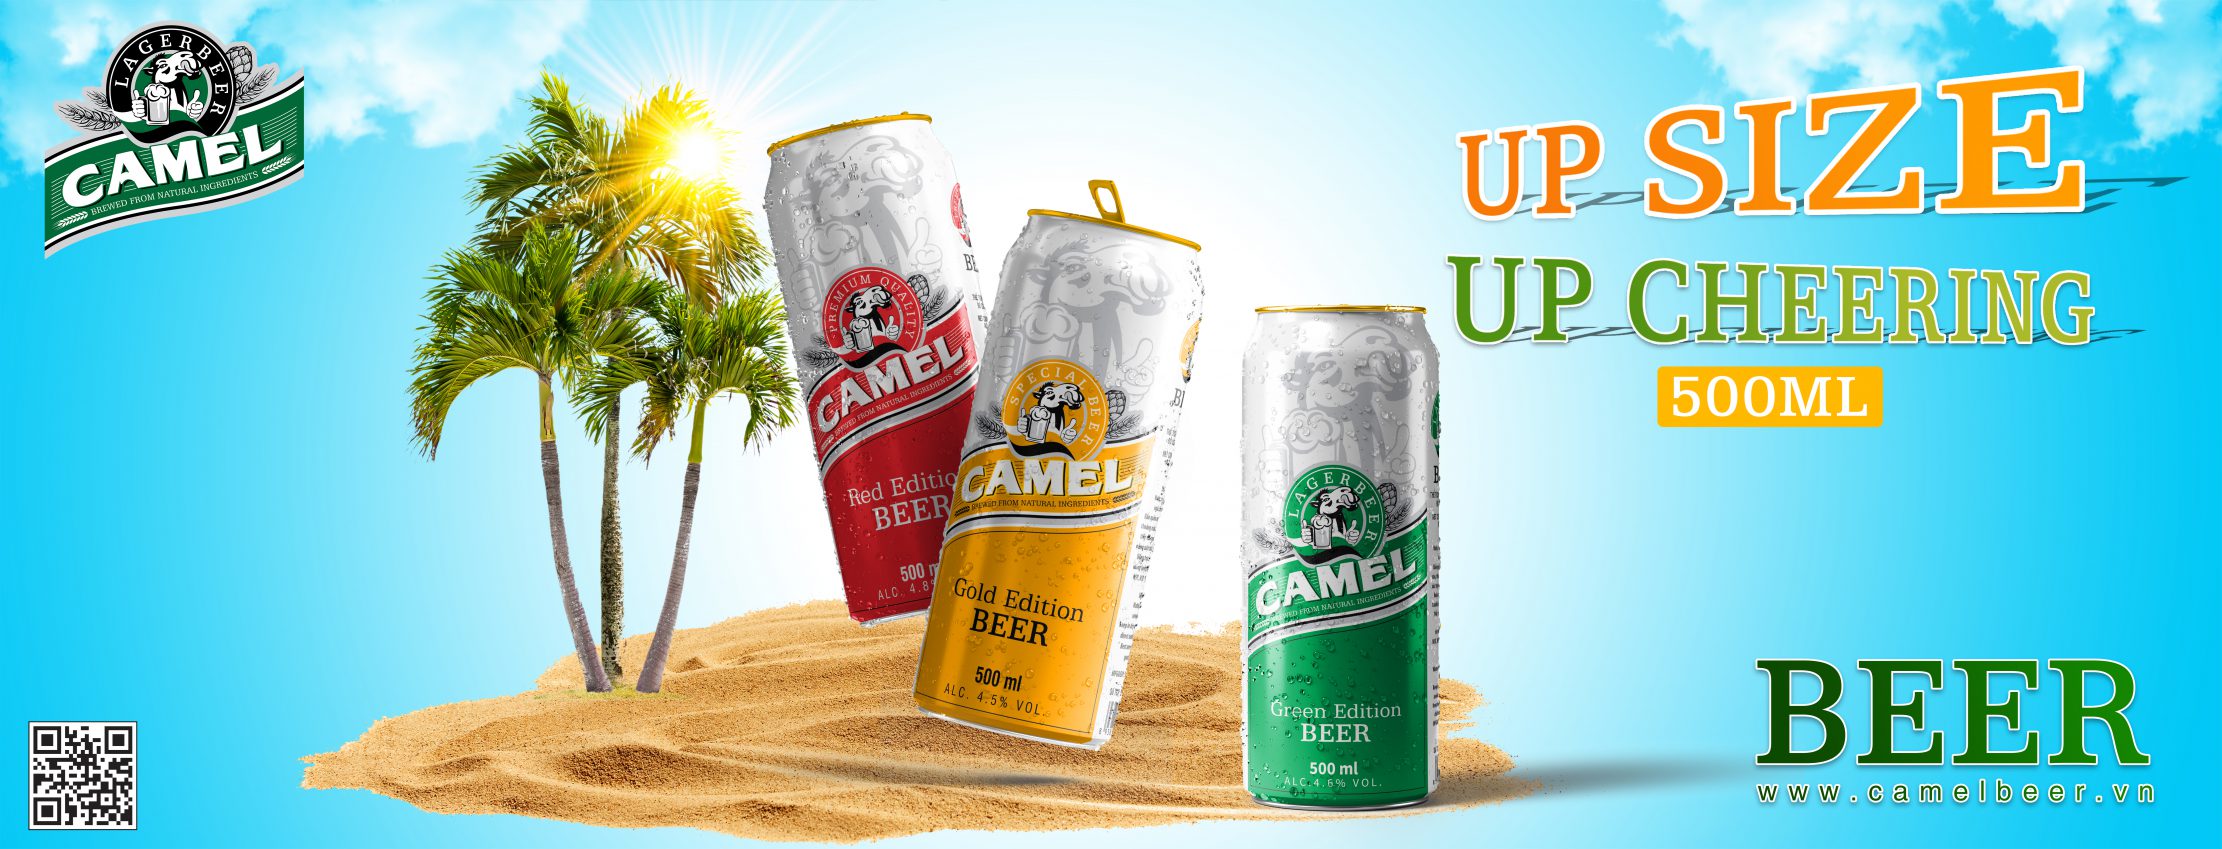 Camel Beer - Up size, up cheering